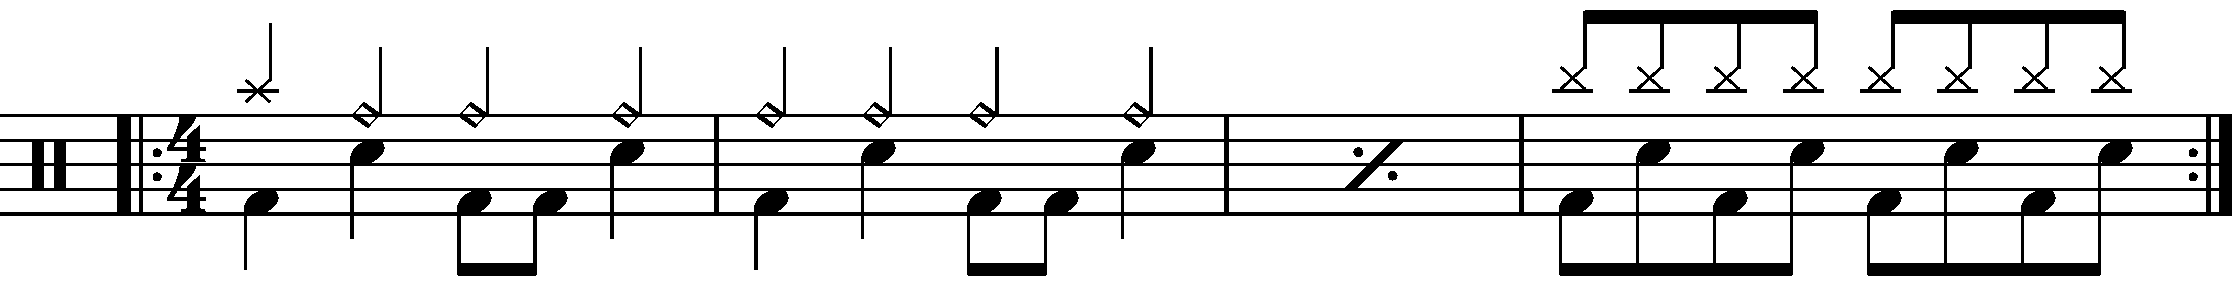 A four bar phrase using a double time groove as a fill